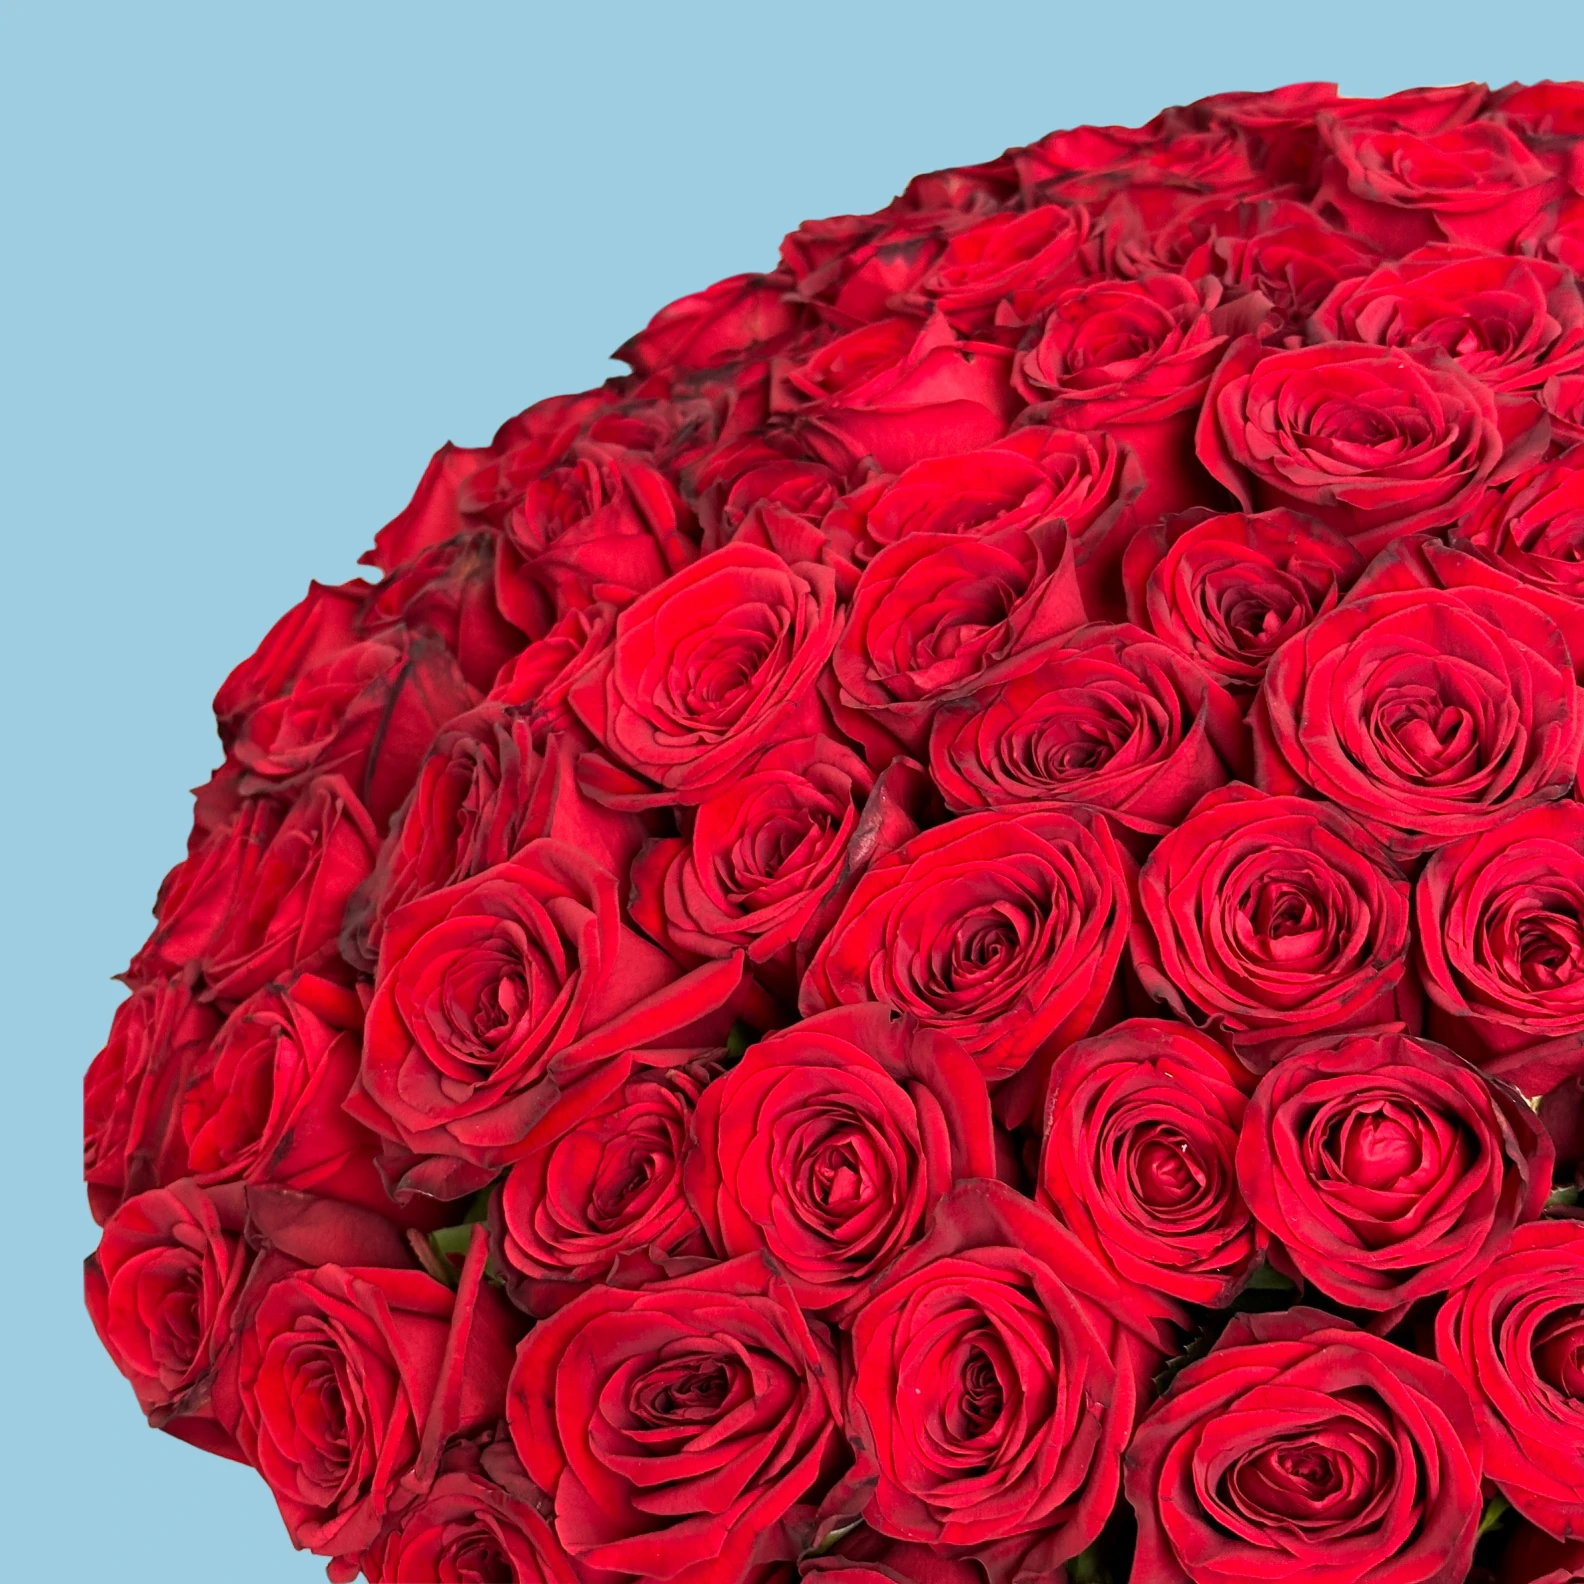 150 Red Roses from Kenya - image №3